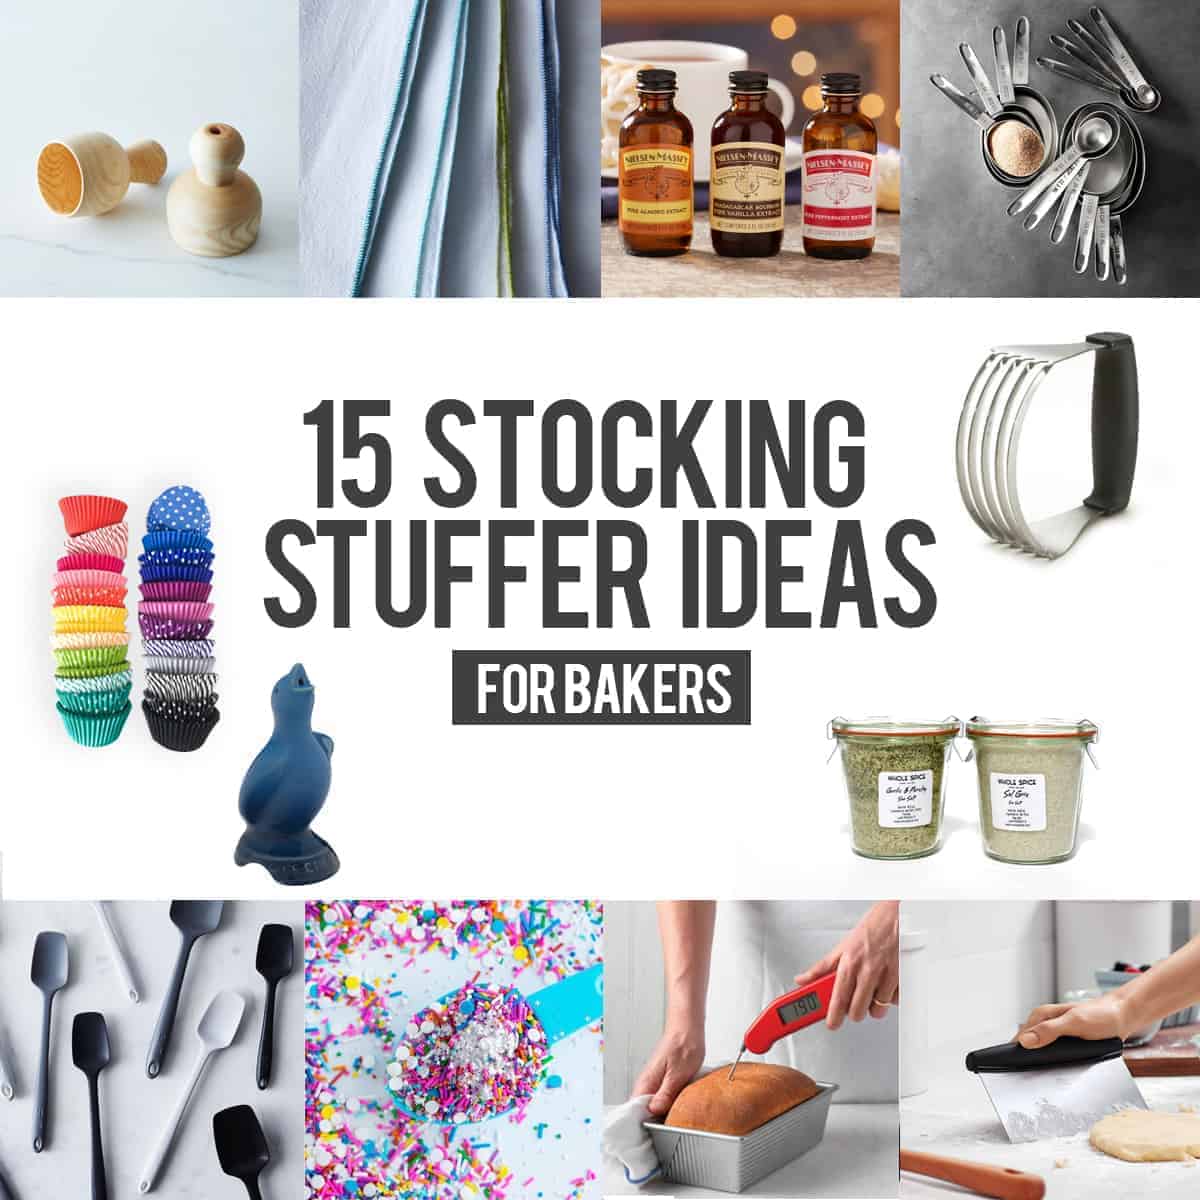 Holiday Gift Guide: Stocking Stuffers for the Cook